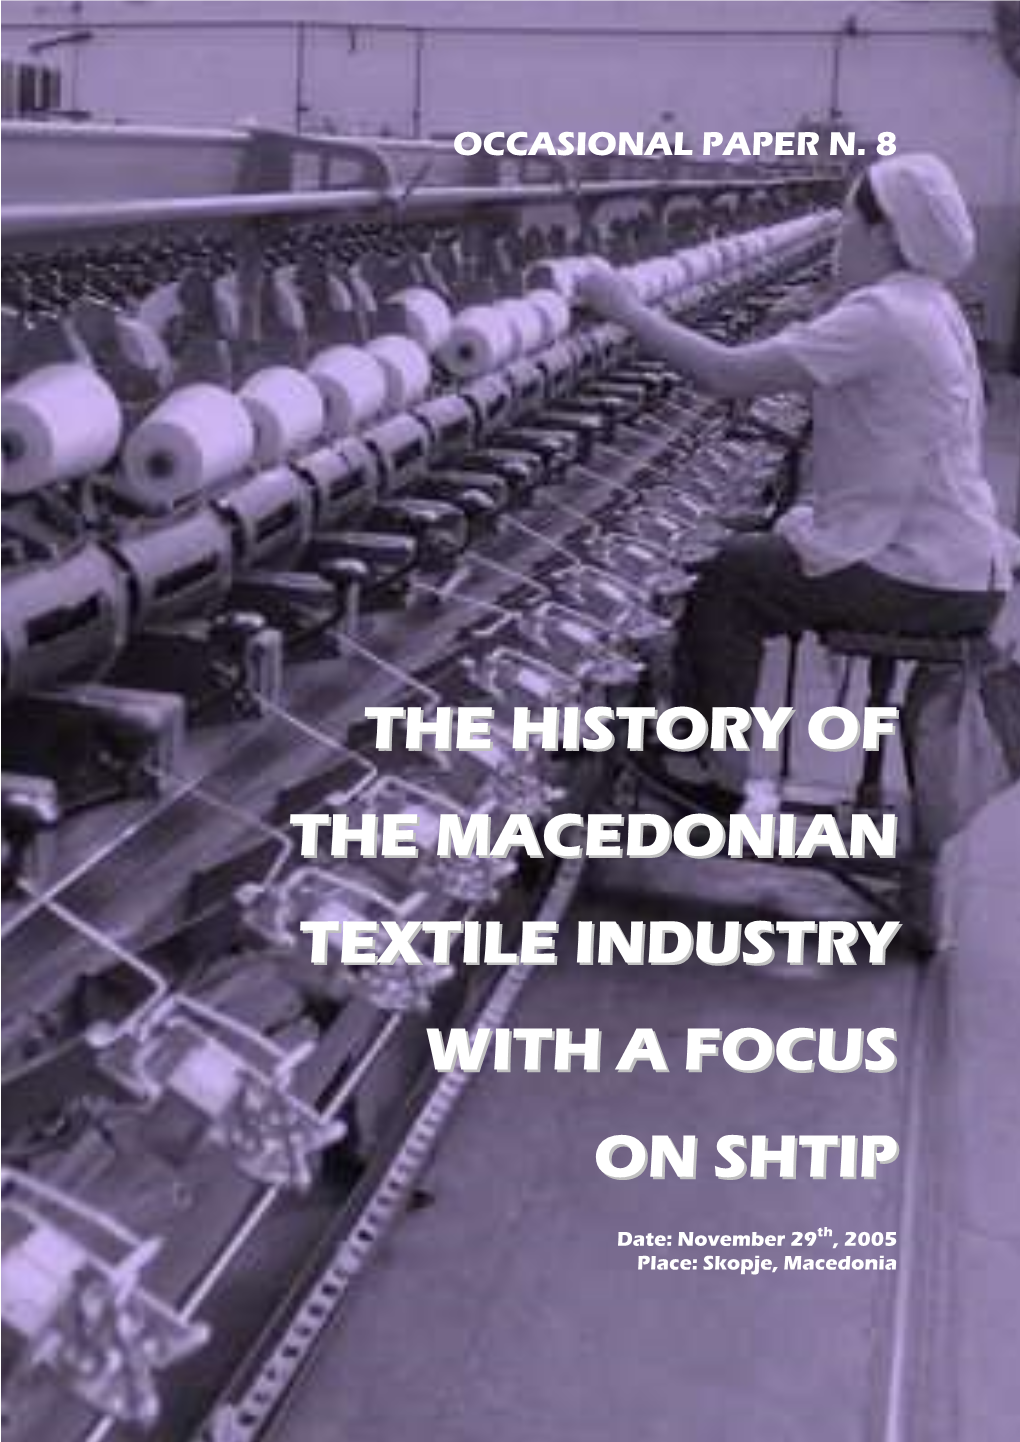 The History of the Macedonian Textile